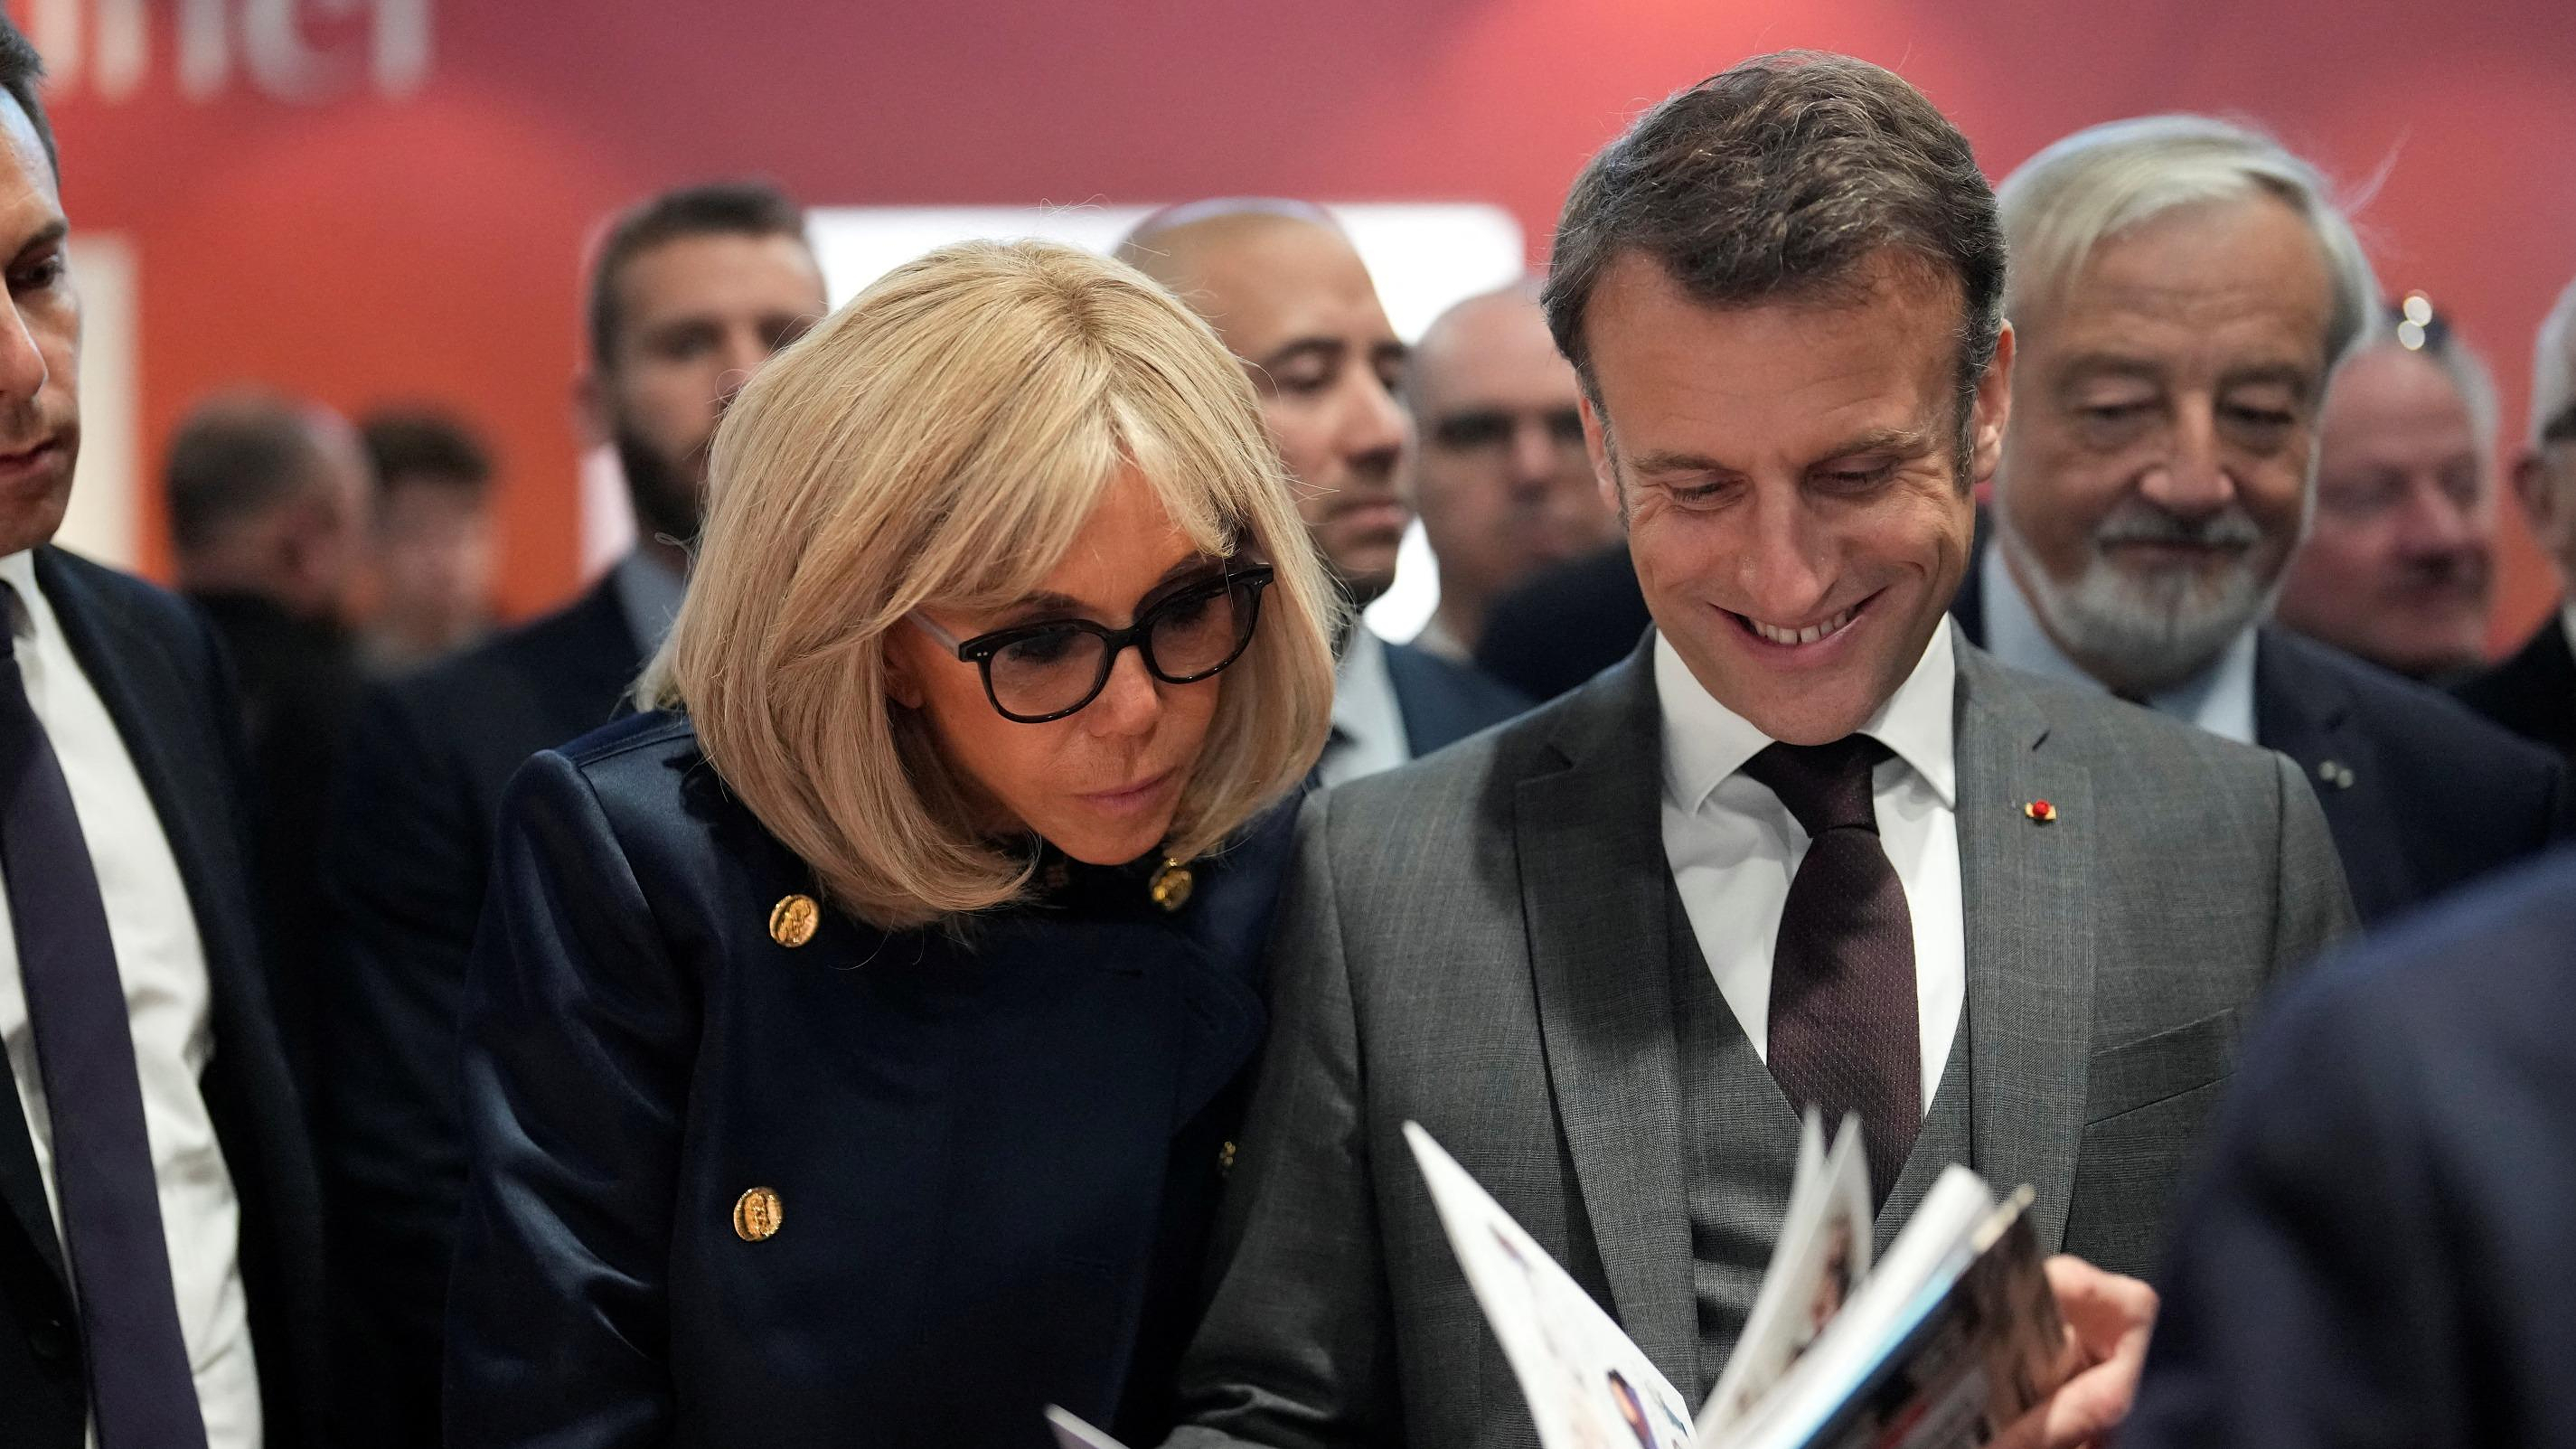 Second-hand books: Macron wants a contribution to “protect the single price” of new books